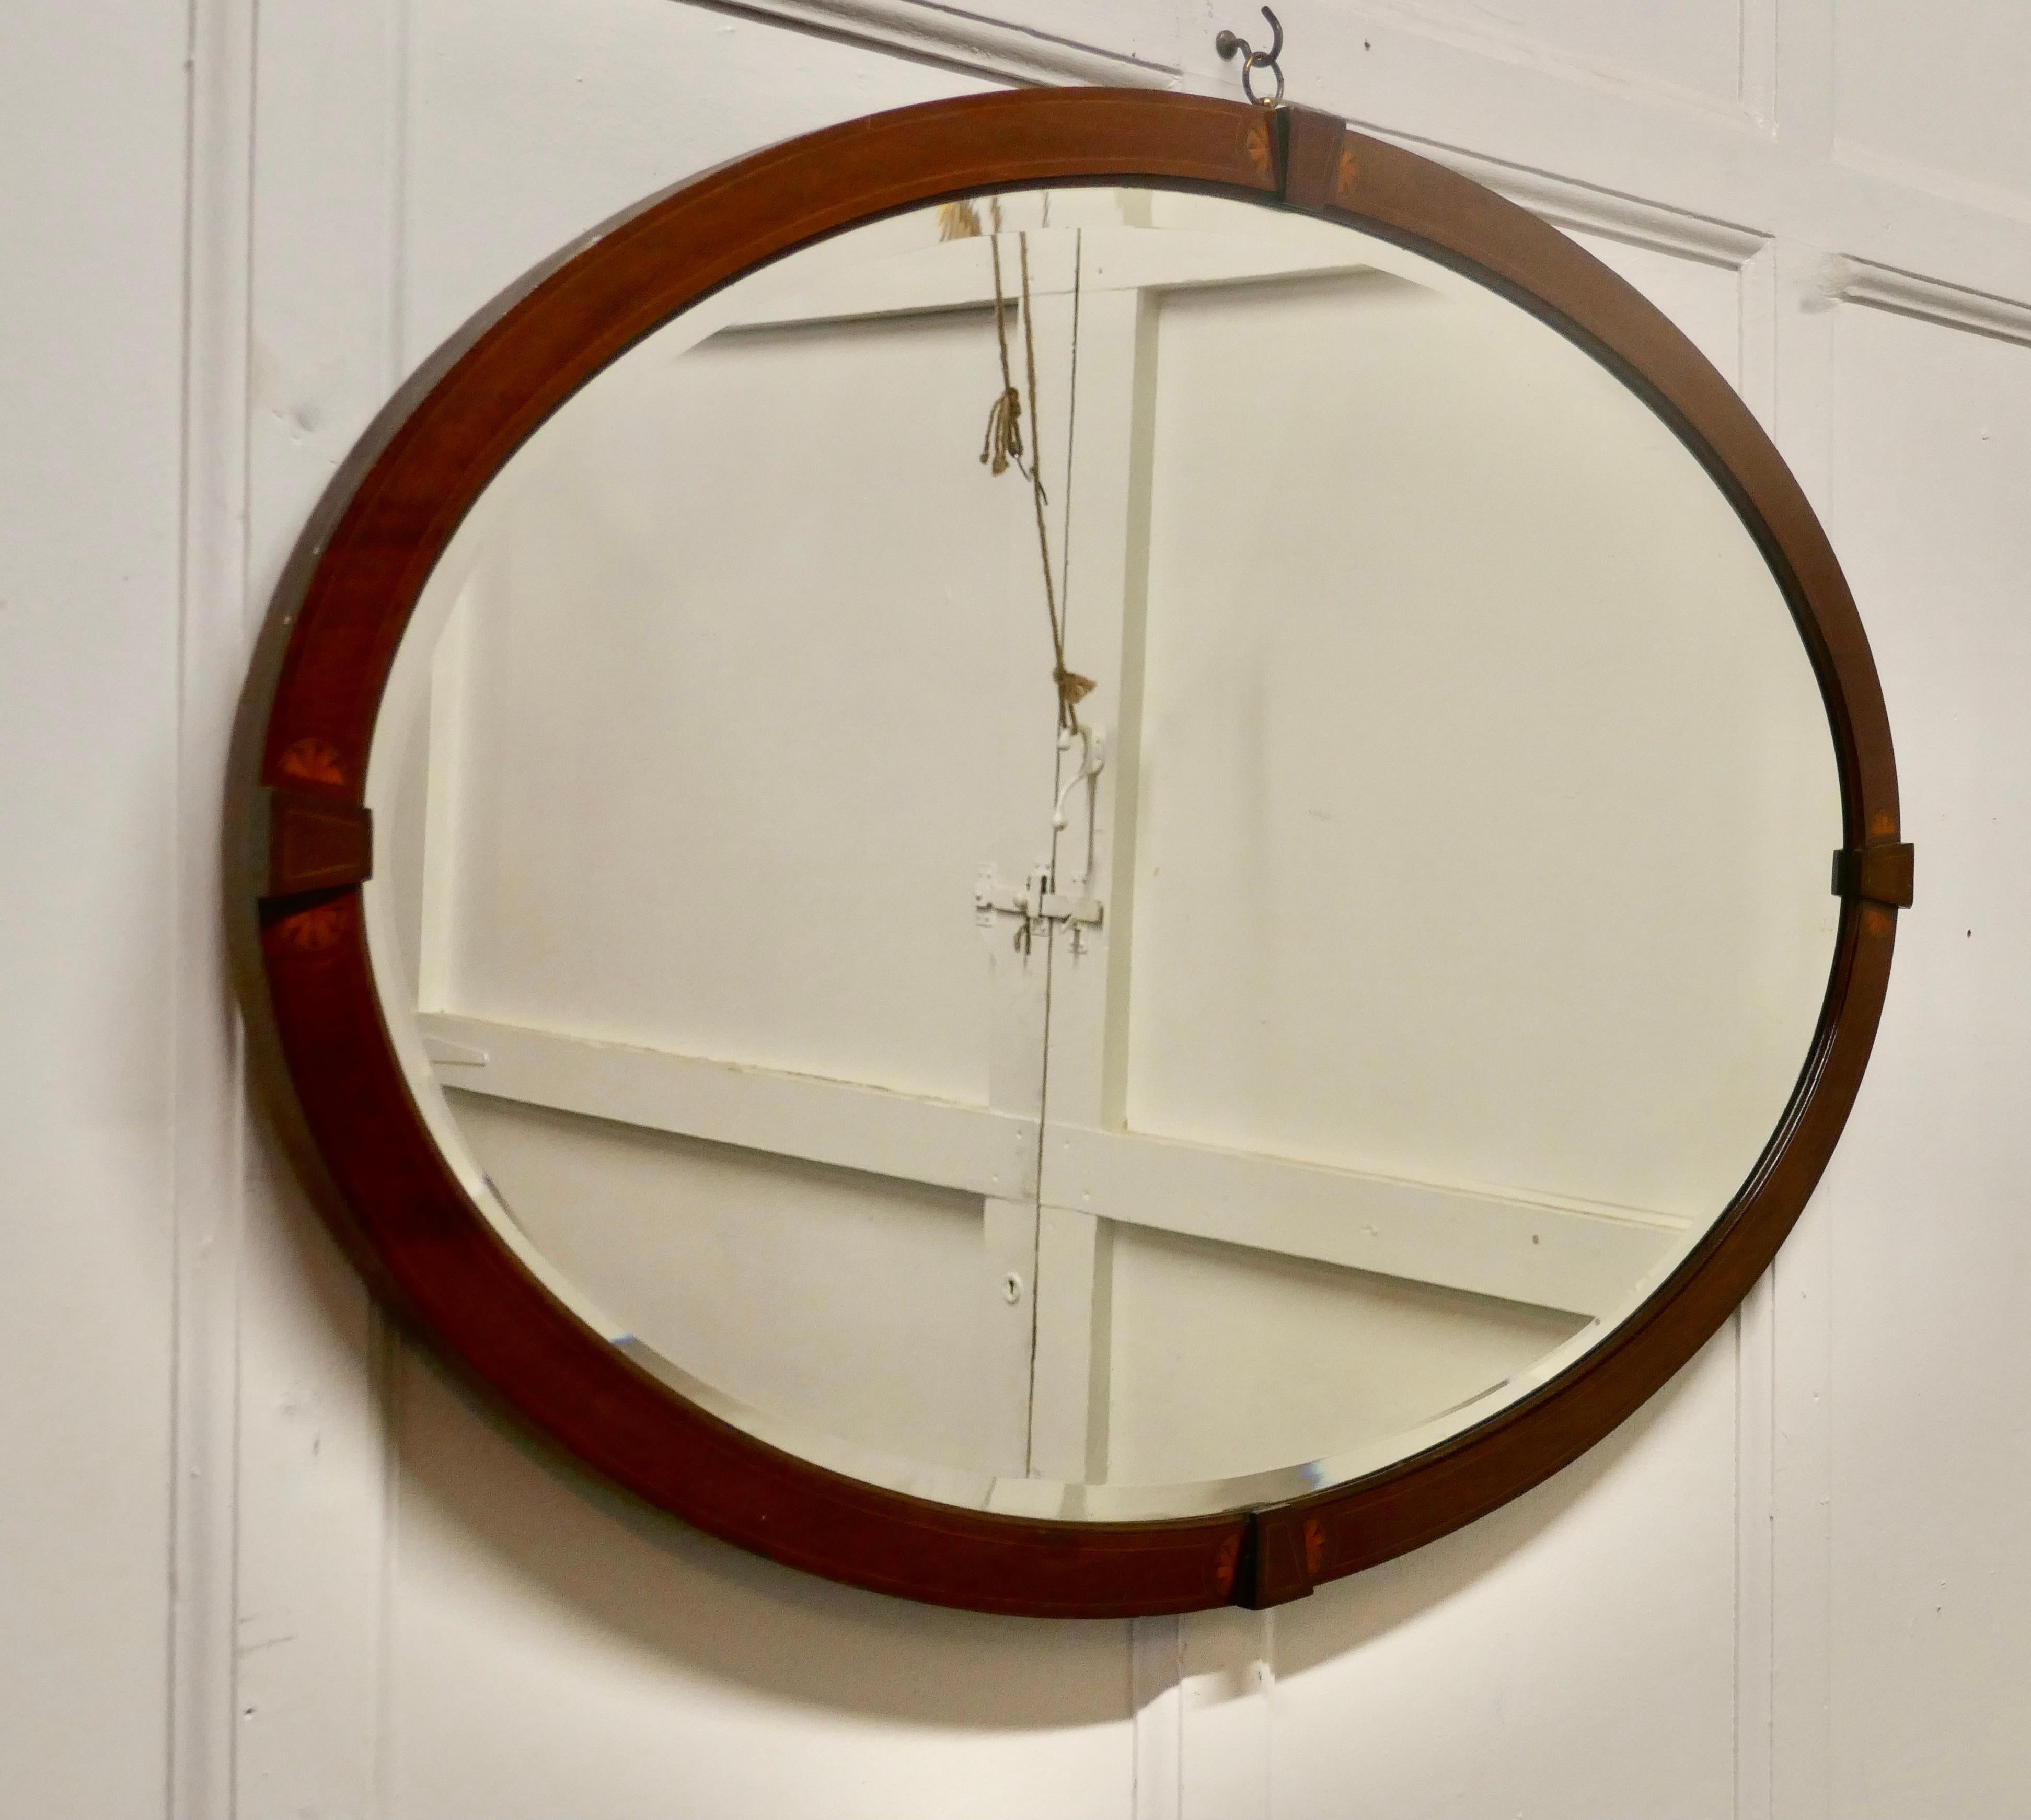 A large Edwardian Inlaid mahogany oval mirror.

This mirror has a 2” wide moulded mahogany frame which has a shell inlay
The large oval frame is in very good condition as is the original Oval bevelled looking glass 
The mirror is 38” wide and